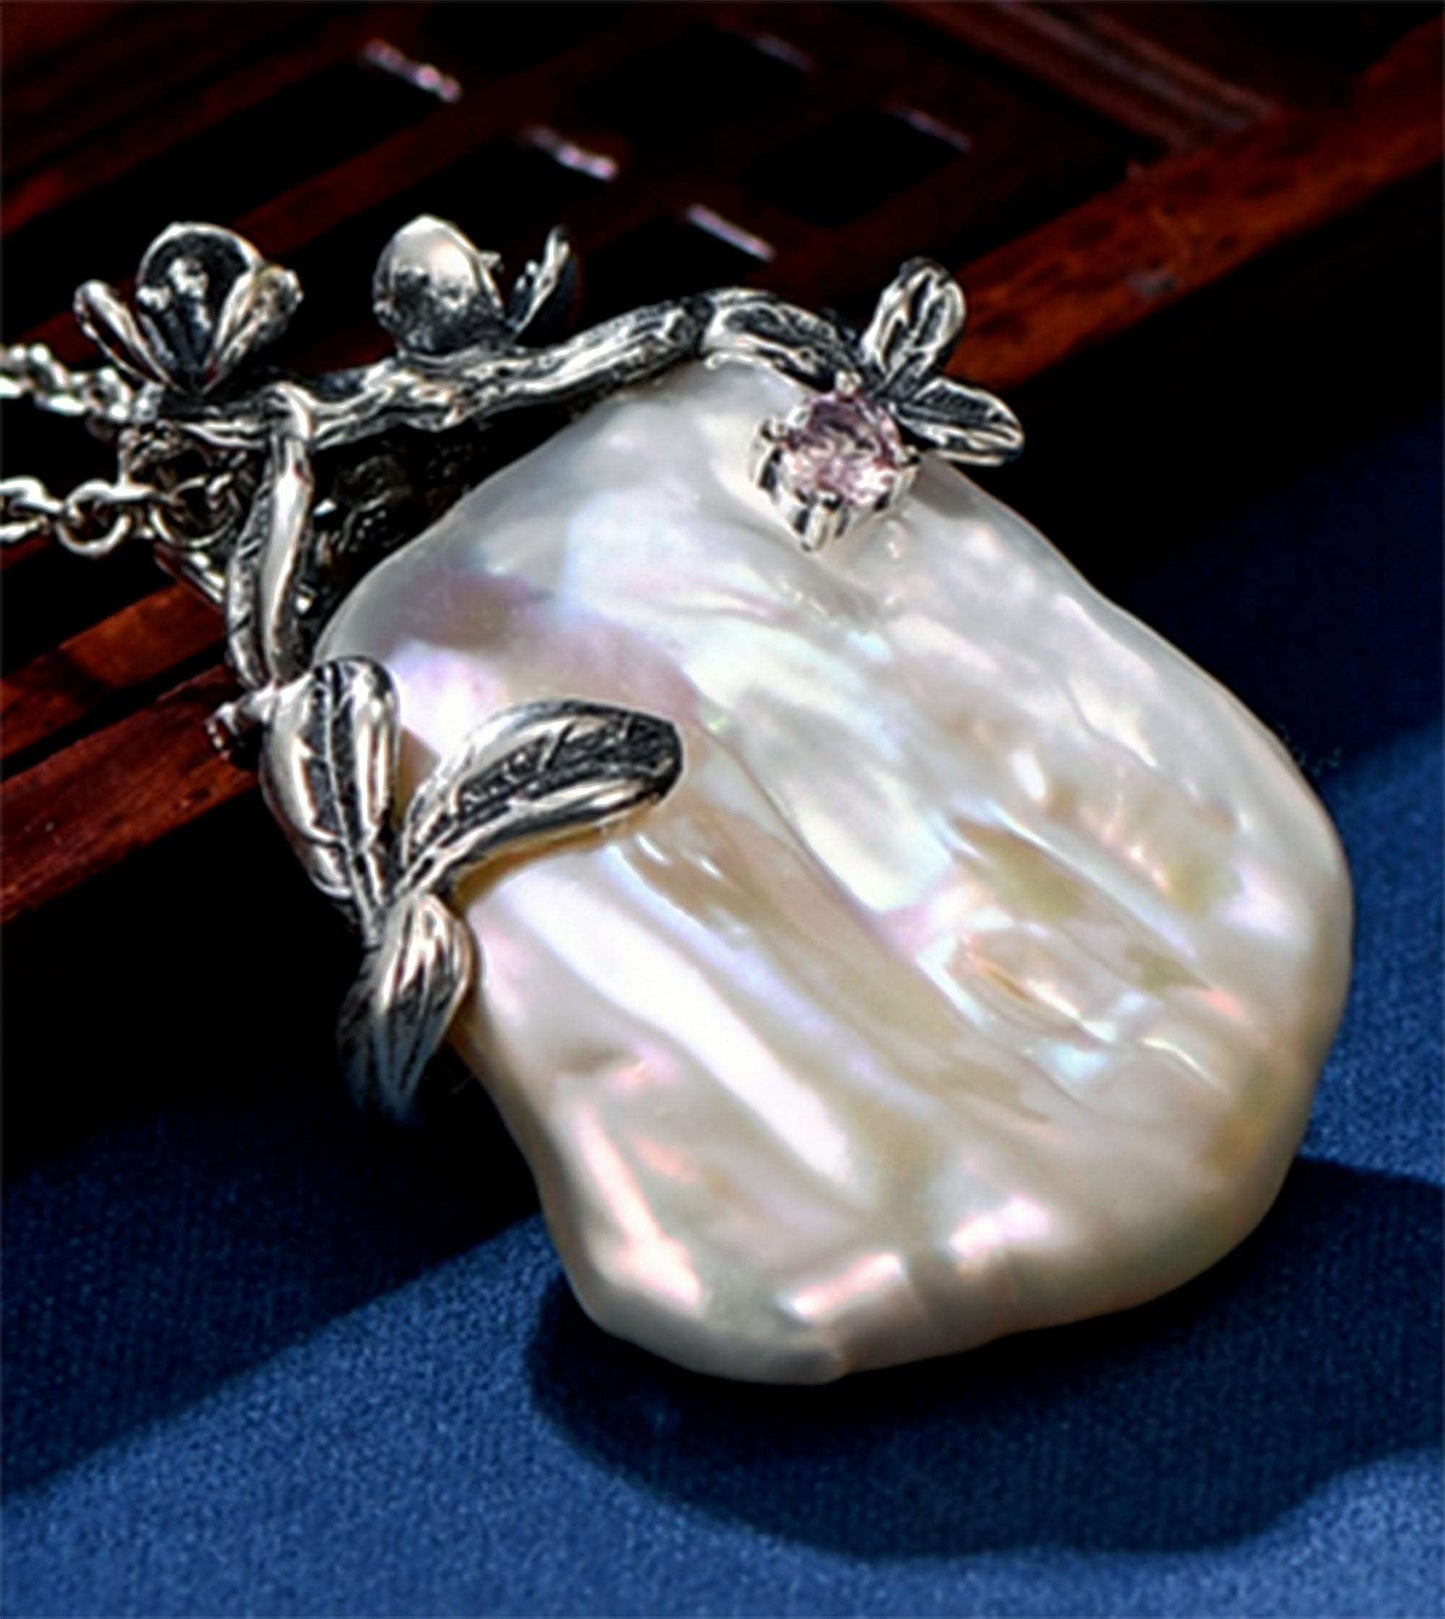 Designer style in a Baroque Pearl pendant set in Sterling Silver-Wholesale - Providence silver gold jewelry usa